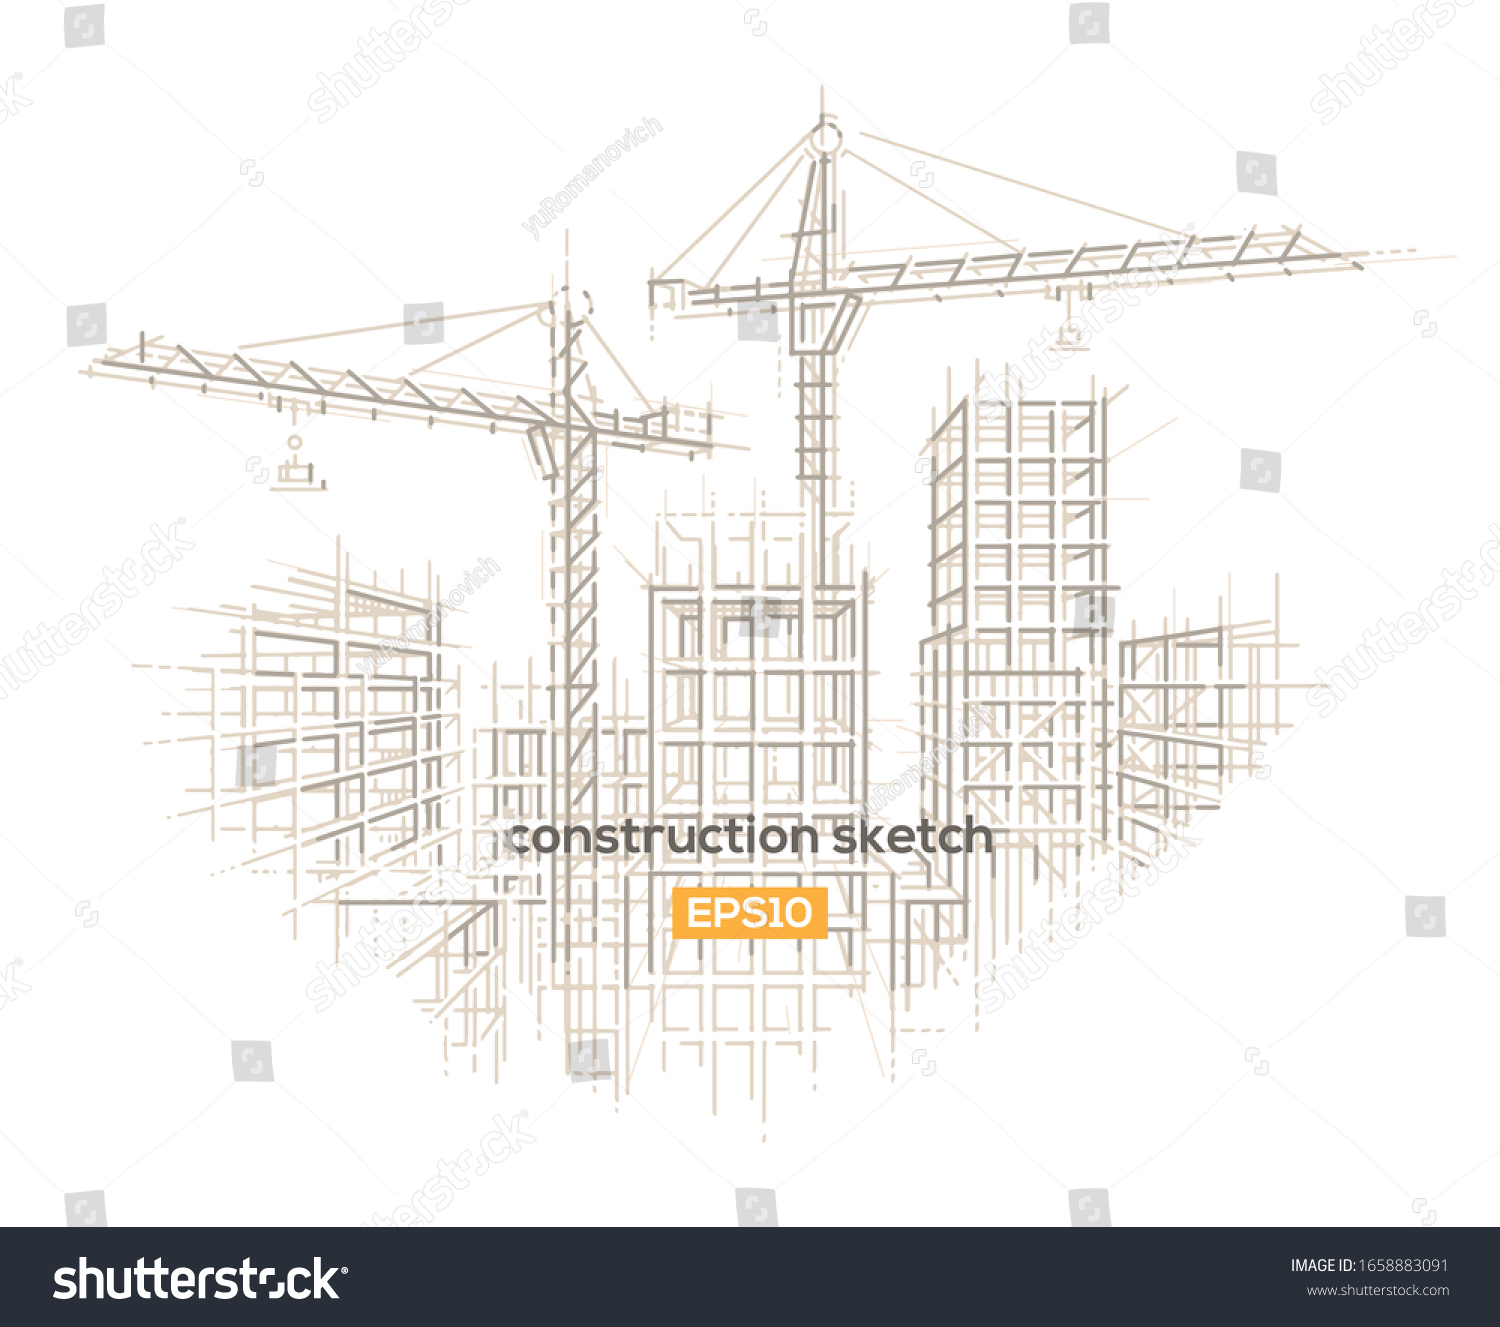 Construction site architectural sketch drawing. Vector, layered.  #1658883091